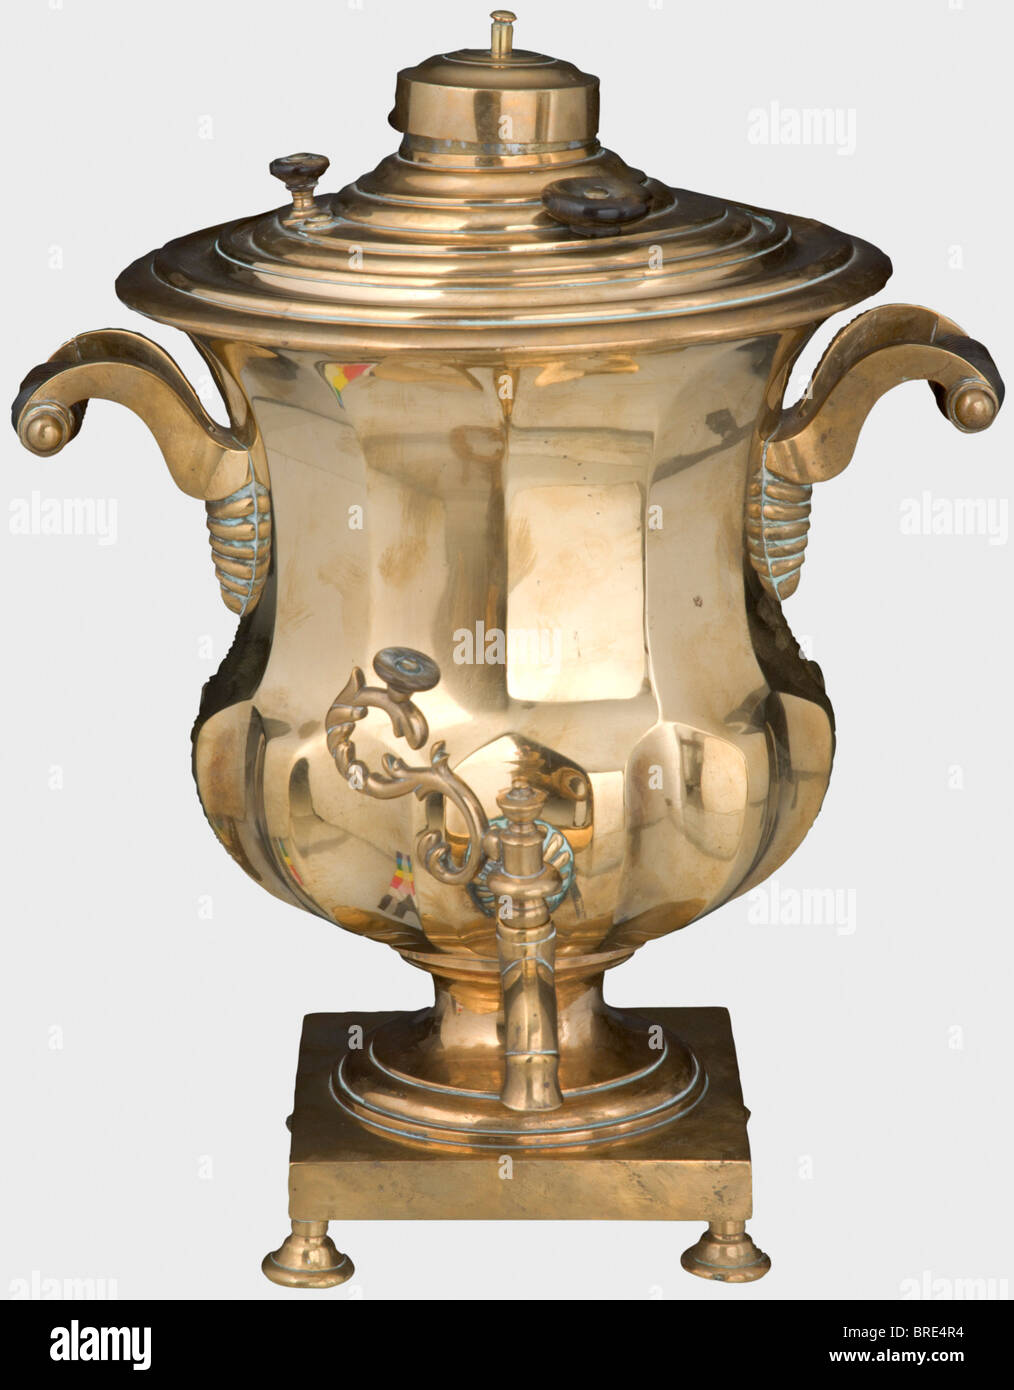 A samovar, probably from Tula, circa 1900 Gilt brass with dark horn handles. Illegible maker's mark on the lid. The inventory label, 'H.V.v.W. G.v.R.' for Duchess Vera of Württemberg, Grand Duchess of Russia on the bottom. Height 41.5 cm. Beautifully preserved gilding. Provenance: Grand Duchess Vera Konstantinovna Romanova (1854 - 1912). historic, historical, 1900s, 20th century, 19th century, vessel, vessels, object, objects, stills, clipping, clippings, cut out, cut-out, cut-outs, Stock Photo